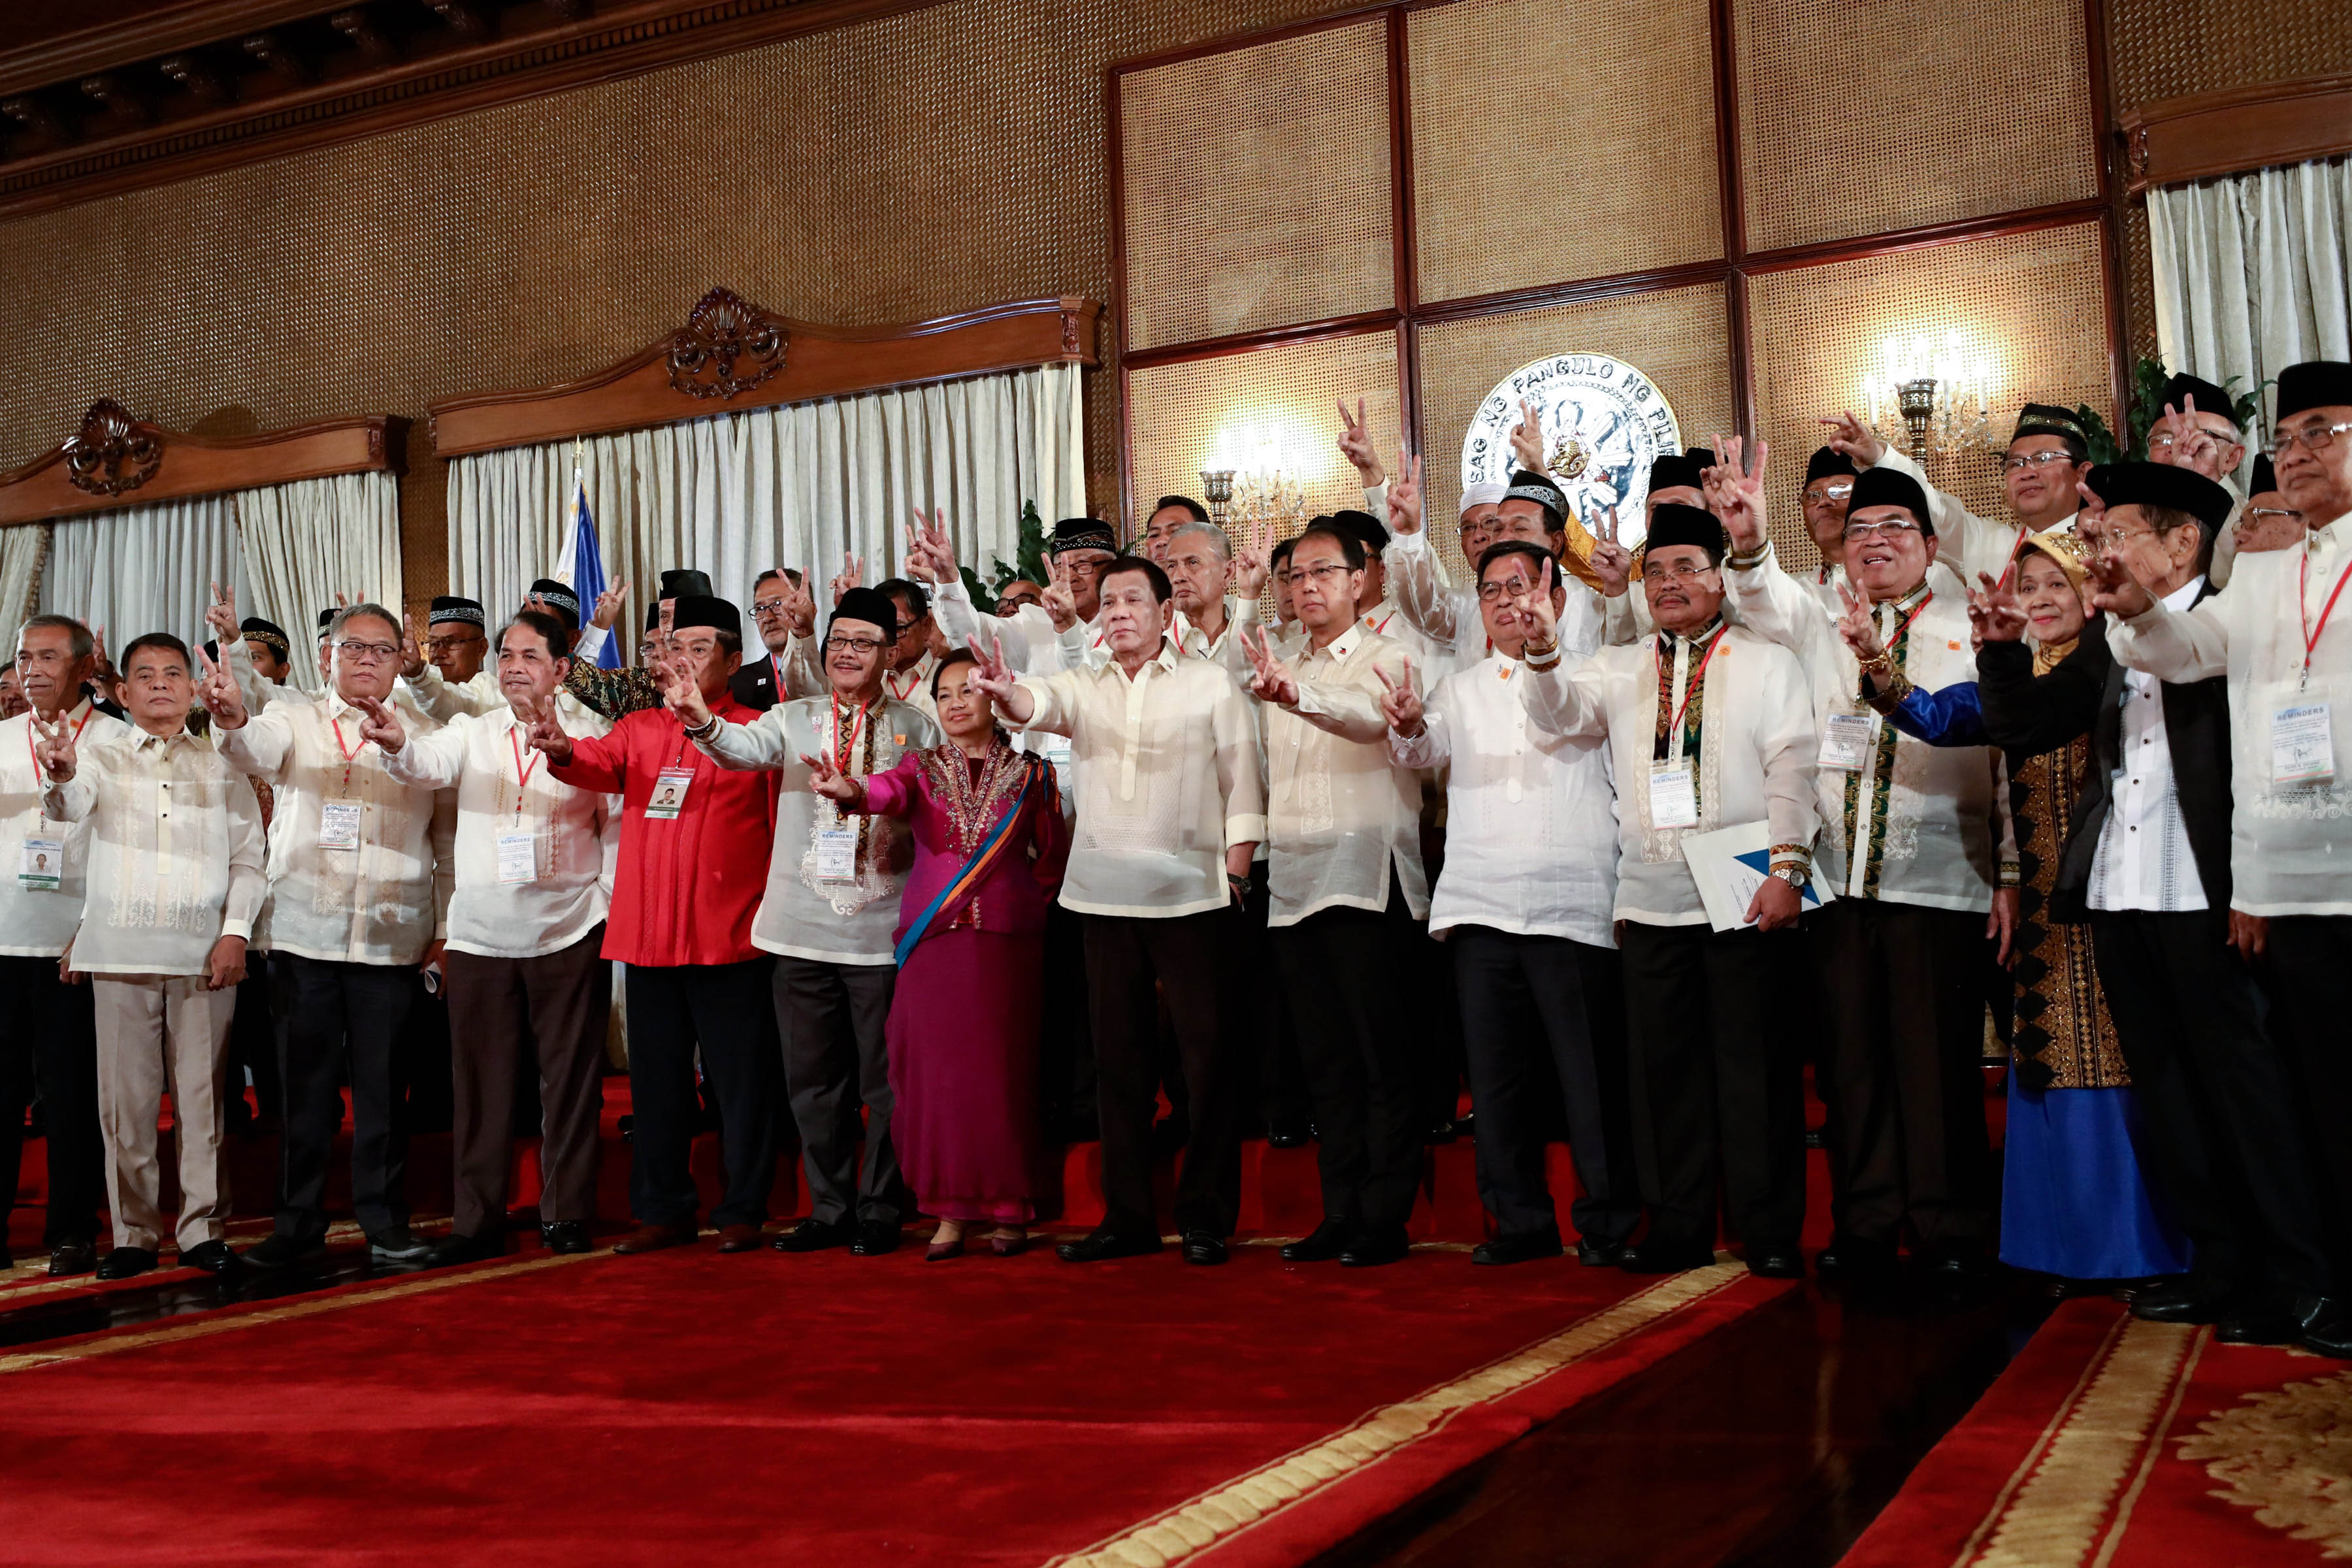 GOVERNANCE CHALLENGES AHEAD. President Rodrigo Duterte flashes the peace sign as he poses for a photo with the members of the Bangsamoro Transition Authority following their oath-taking in Malacañang. Malacañang photo 